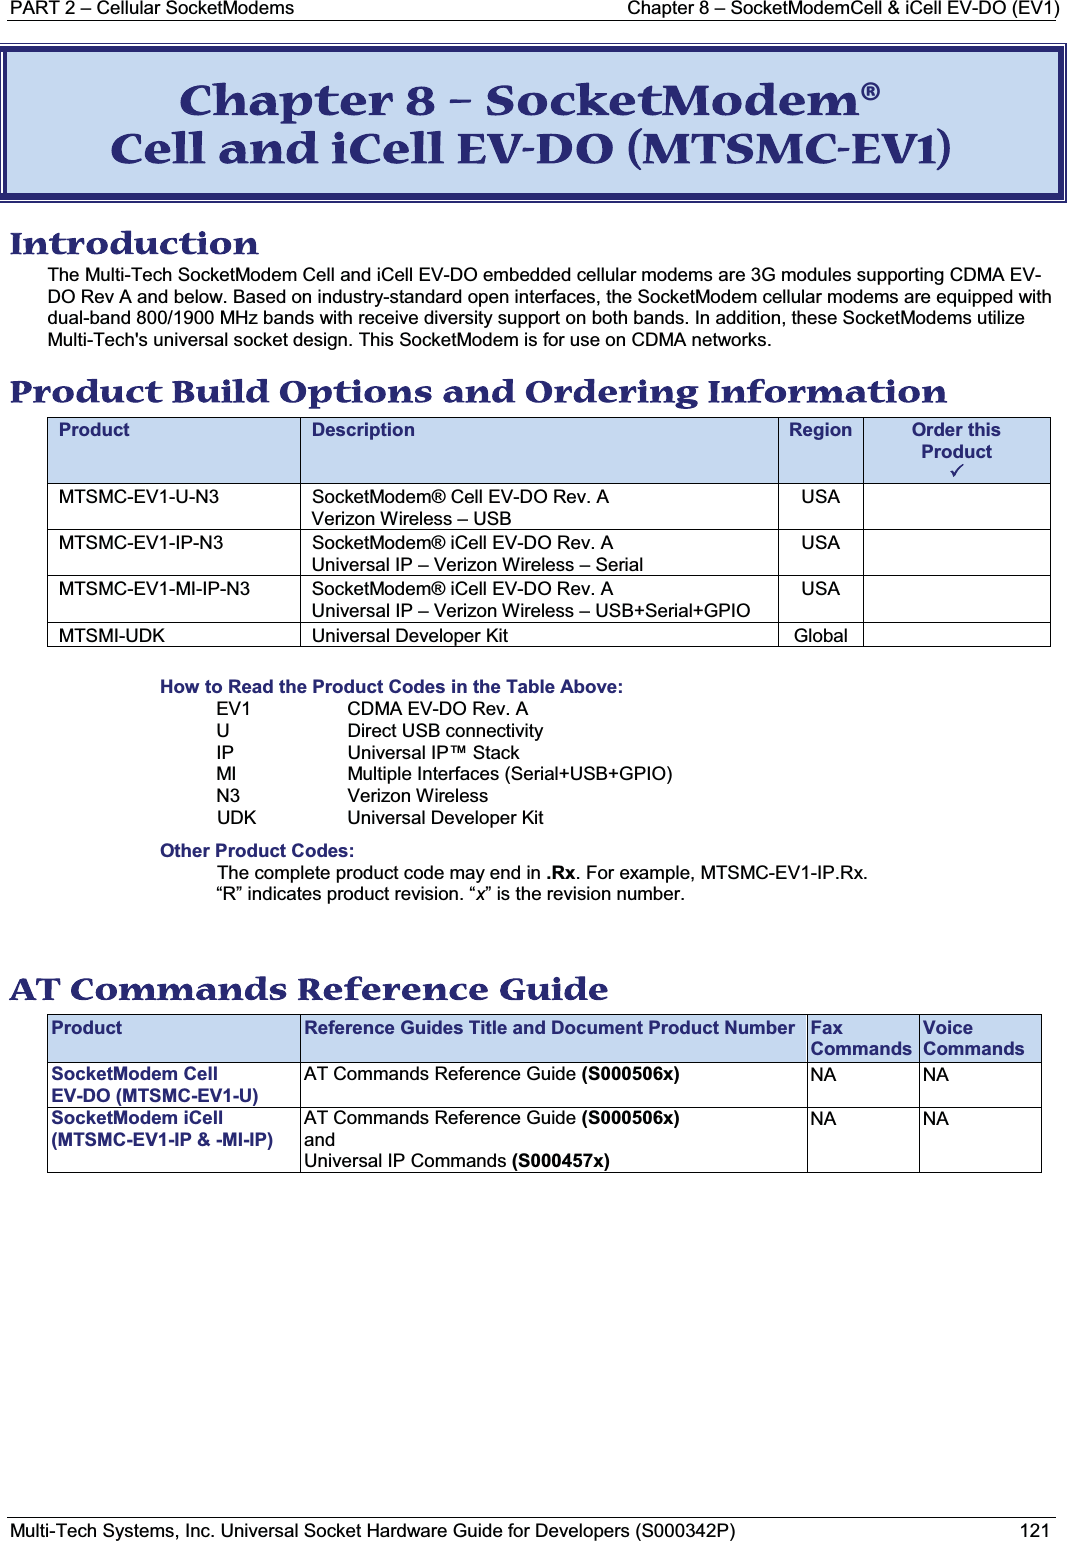 PART 2 – Cellular SocketModems Chapter 8 – SocketModemCell &amp; iCell EV-DO (EV1)Multi-Tech Systems, Inc. Universal Socket Hardware Guide for Developers (S000342P) 121CChapter 8 – SocketModem® Cell and iCell EV-DO (MTSMC-EV1) Introduction The Multi-Tech SocketModem Cell and iCell EV-DO embedded cellular modems are 3G modules supporting CDMA EV-DO Rev A and below. Based on industry-standard open interfaces, the SocketModem cellular modems are equipped with dual-band 800/1900 MHz bands with receive diversity support on both bands. In addition, these SocketModems utilize Multi-Tech&apos;s universal socket design. This SocketModem is for use on CDMA networks.Product Build Options and Ordering Information Product Description Region Order this Product3MTSMC-EV1-U-N3 SocketModem® Cell EV-DO Rev. AVerizon Wireless – USBUSAMTSMC-EV1-IP-N3 SocketModem® iCell EV-DO Rev. AUniversal IP – Verizon Wireless – SerialUSAMTSMC-EV1-MI-IP-N3 SocketModem® iCell EV-DO Rev. AUniversal IP – Verizon Wireless – USB+Serial+GPIOUSAMTSMI-UDK Universal Developer Kit GlobalHow to Read the Product Codes in the Table Above:EV1 CDMA EV-DO Rev. AU Direct USB connectivityIP Universal IP™ StackMI Multiple Interfaces (Serial+USB+GPIO)N3 Verizon WirelessUDK Universal Developer KitOther Product Codes:The complete product code may end in .Rx. For example, MTSMC-EV1-IP.Rx.“R” indicates product revision. “x” is the revision number.AT Commands Reference Guide Product Reference Guides Title and Document Product Number Fax CommandsVoice CommandsSocketModem Cell EV-DO (MTSMC-EV1-U)AT Commands Reference Guide (S000506x) NA NASocketModem iCell (MTSMC-EV1-IP &amp; -MI-IP)AT Commands Reference Guide (S000506x)andUniversal IP Commands (S000457x)NA NA